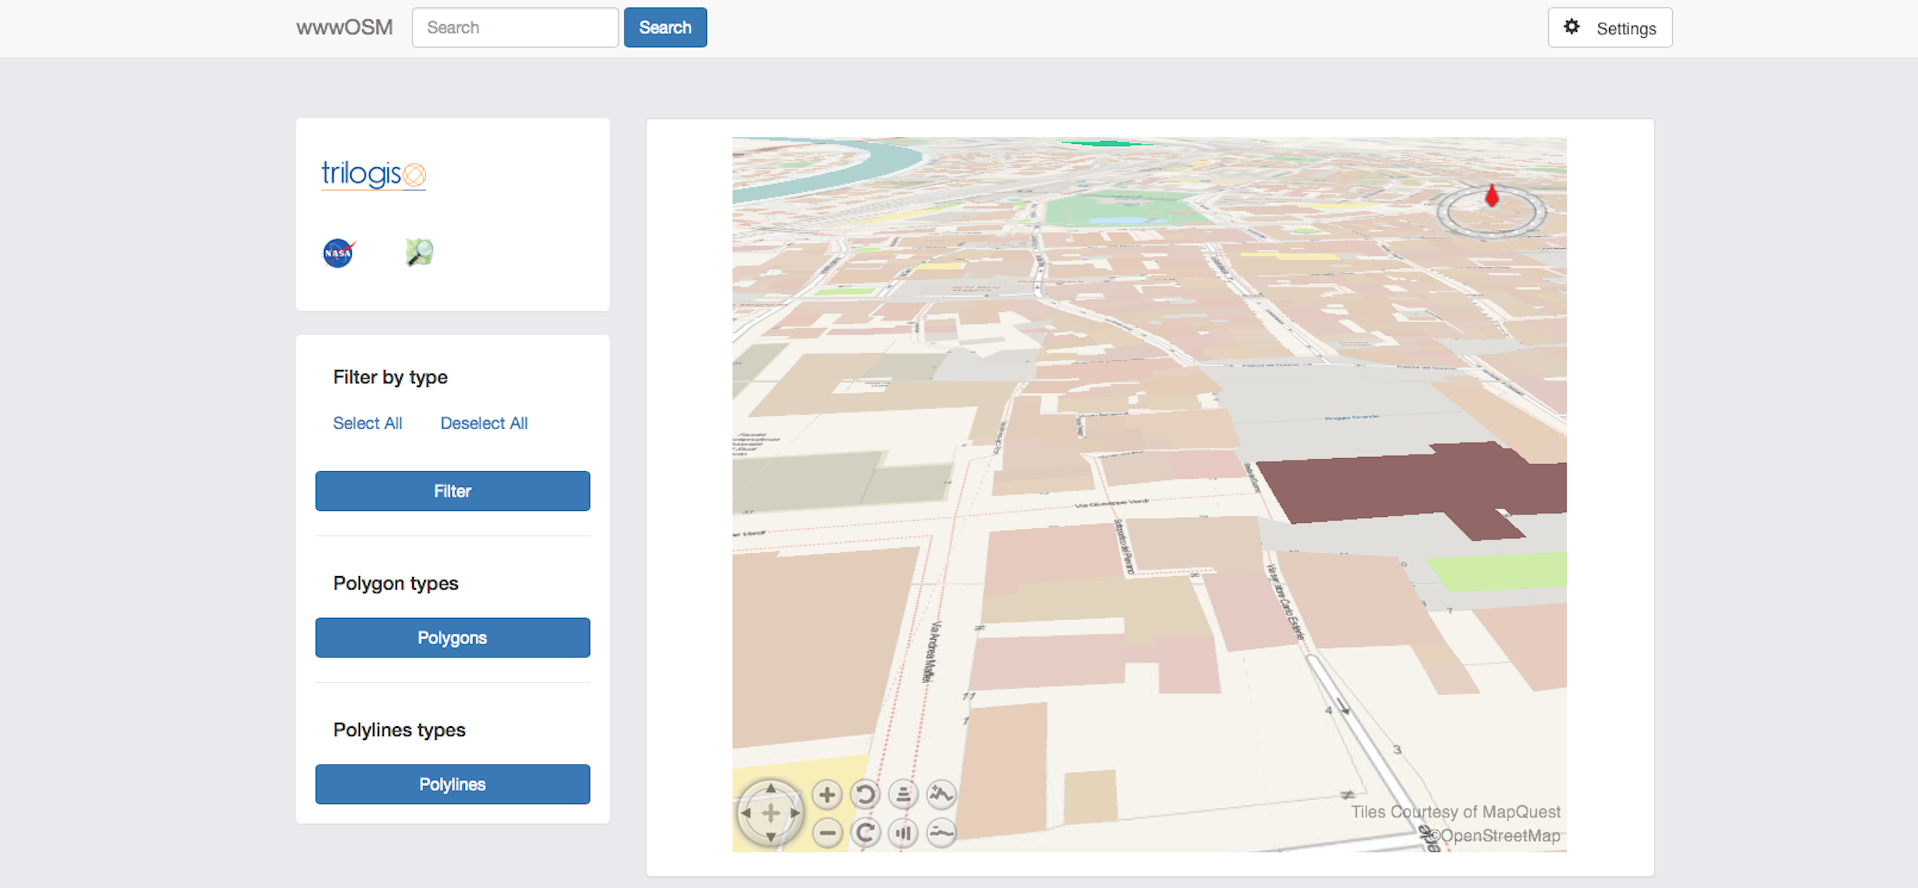 2D View with OSM tiles